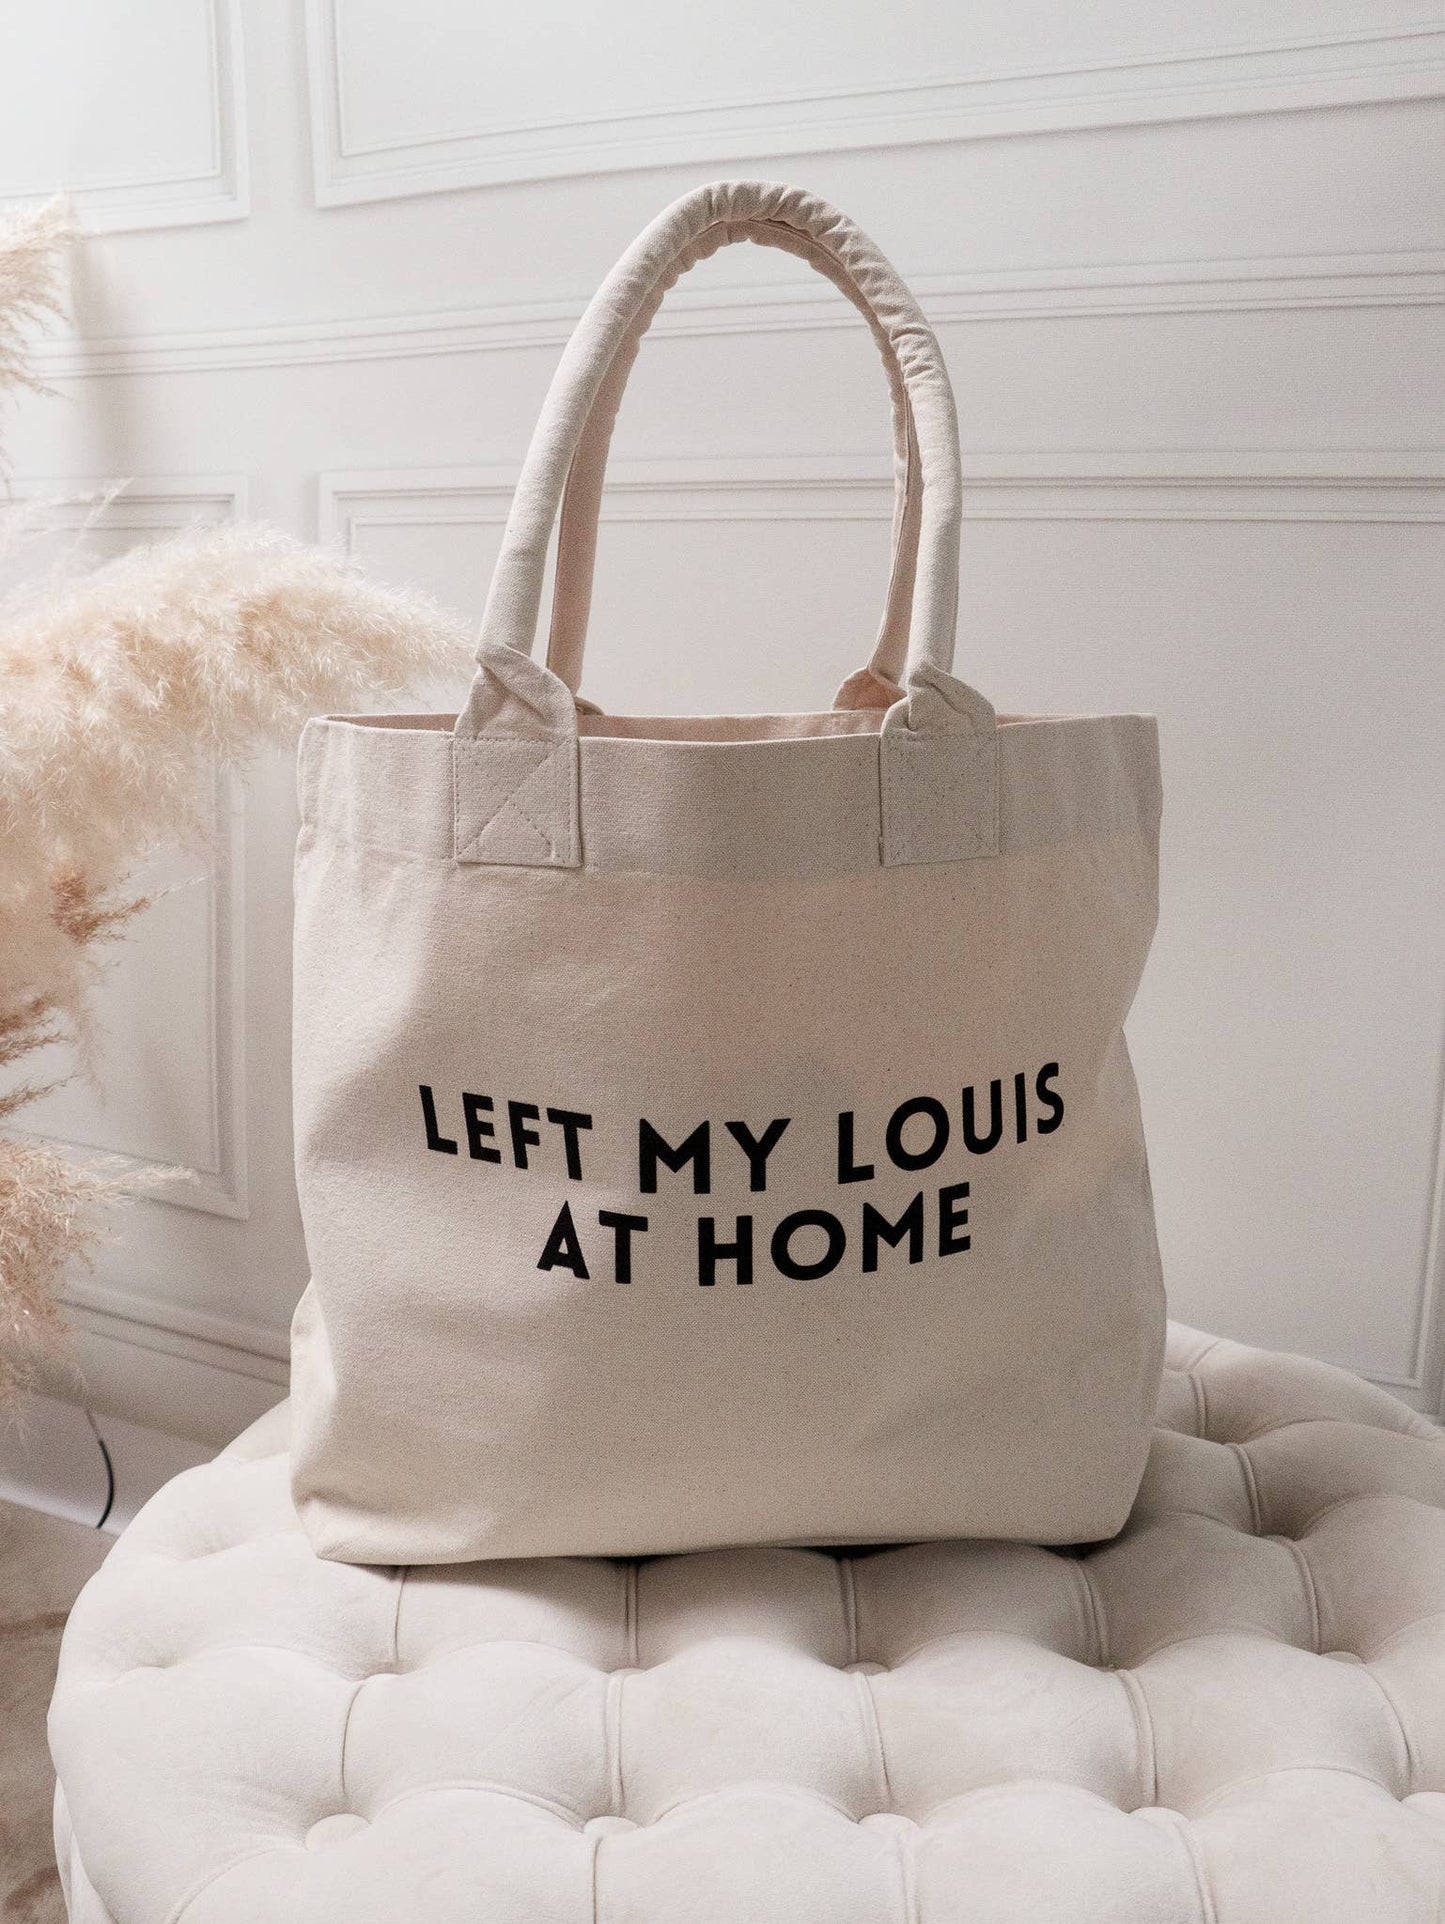 "Left my Louis at Home" Canvas Bag.